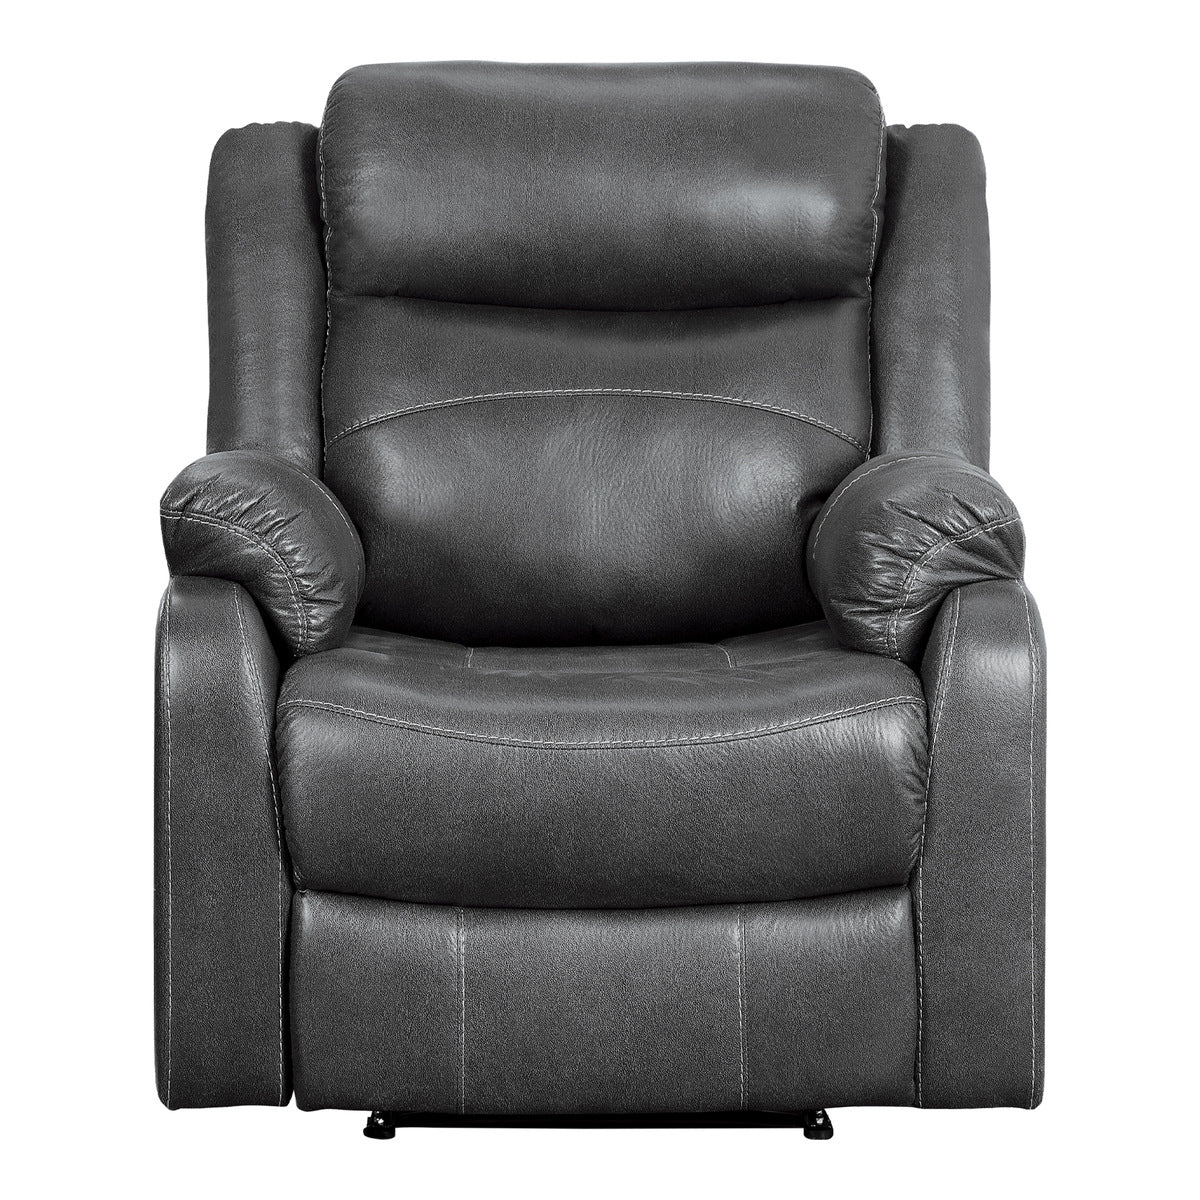 Yerba Dark Gray Solid Wood And Plywood Lay Flat Polished Microfiber Upholstered Reclining Chair